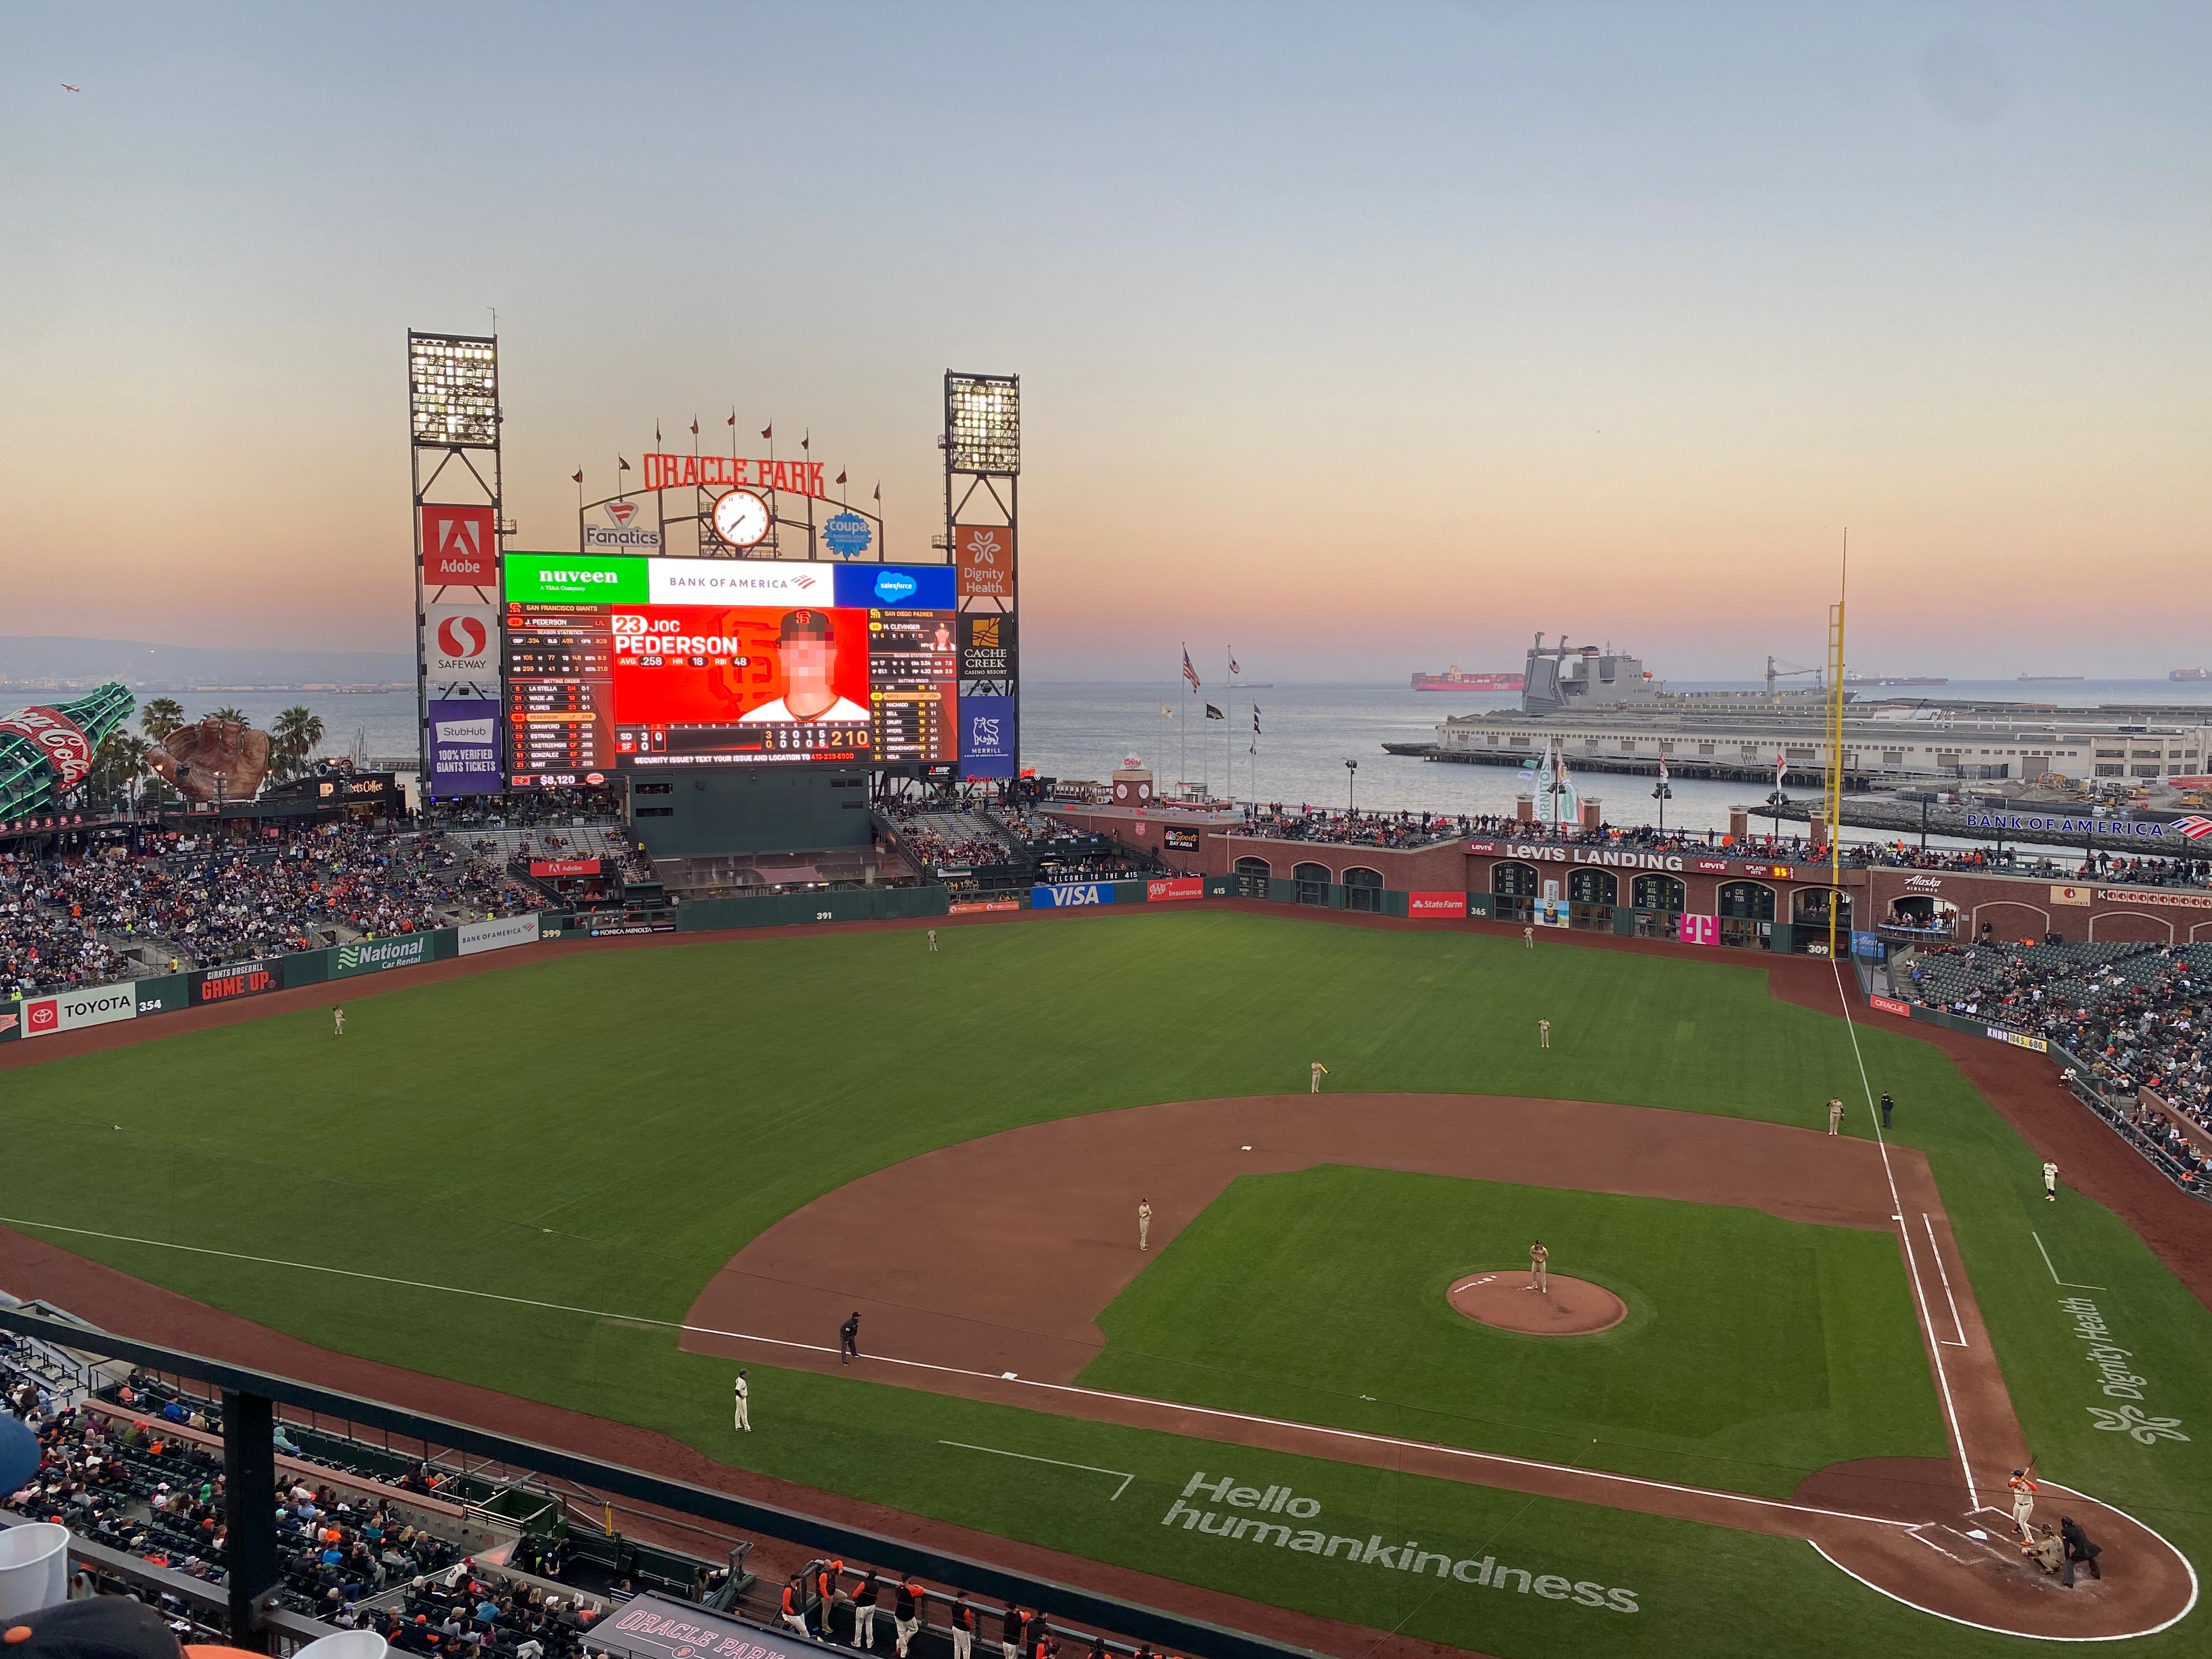 San Francisco Giants Triples Alley at Oracle Park 